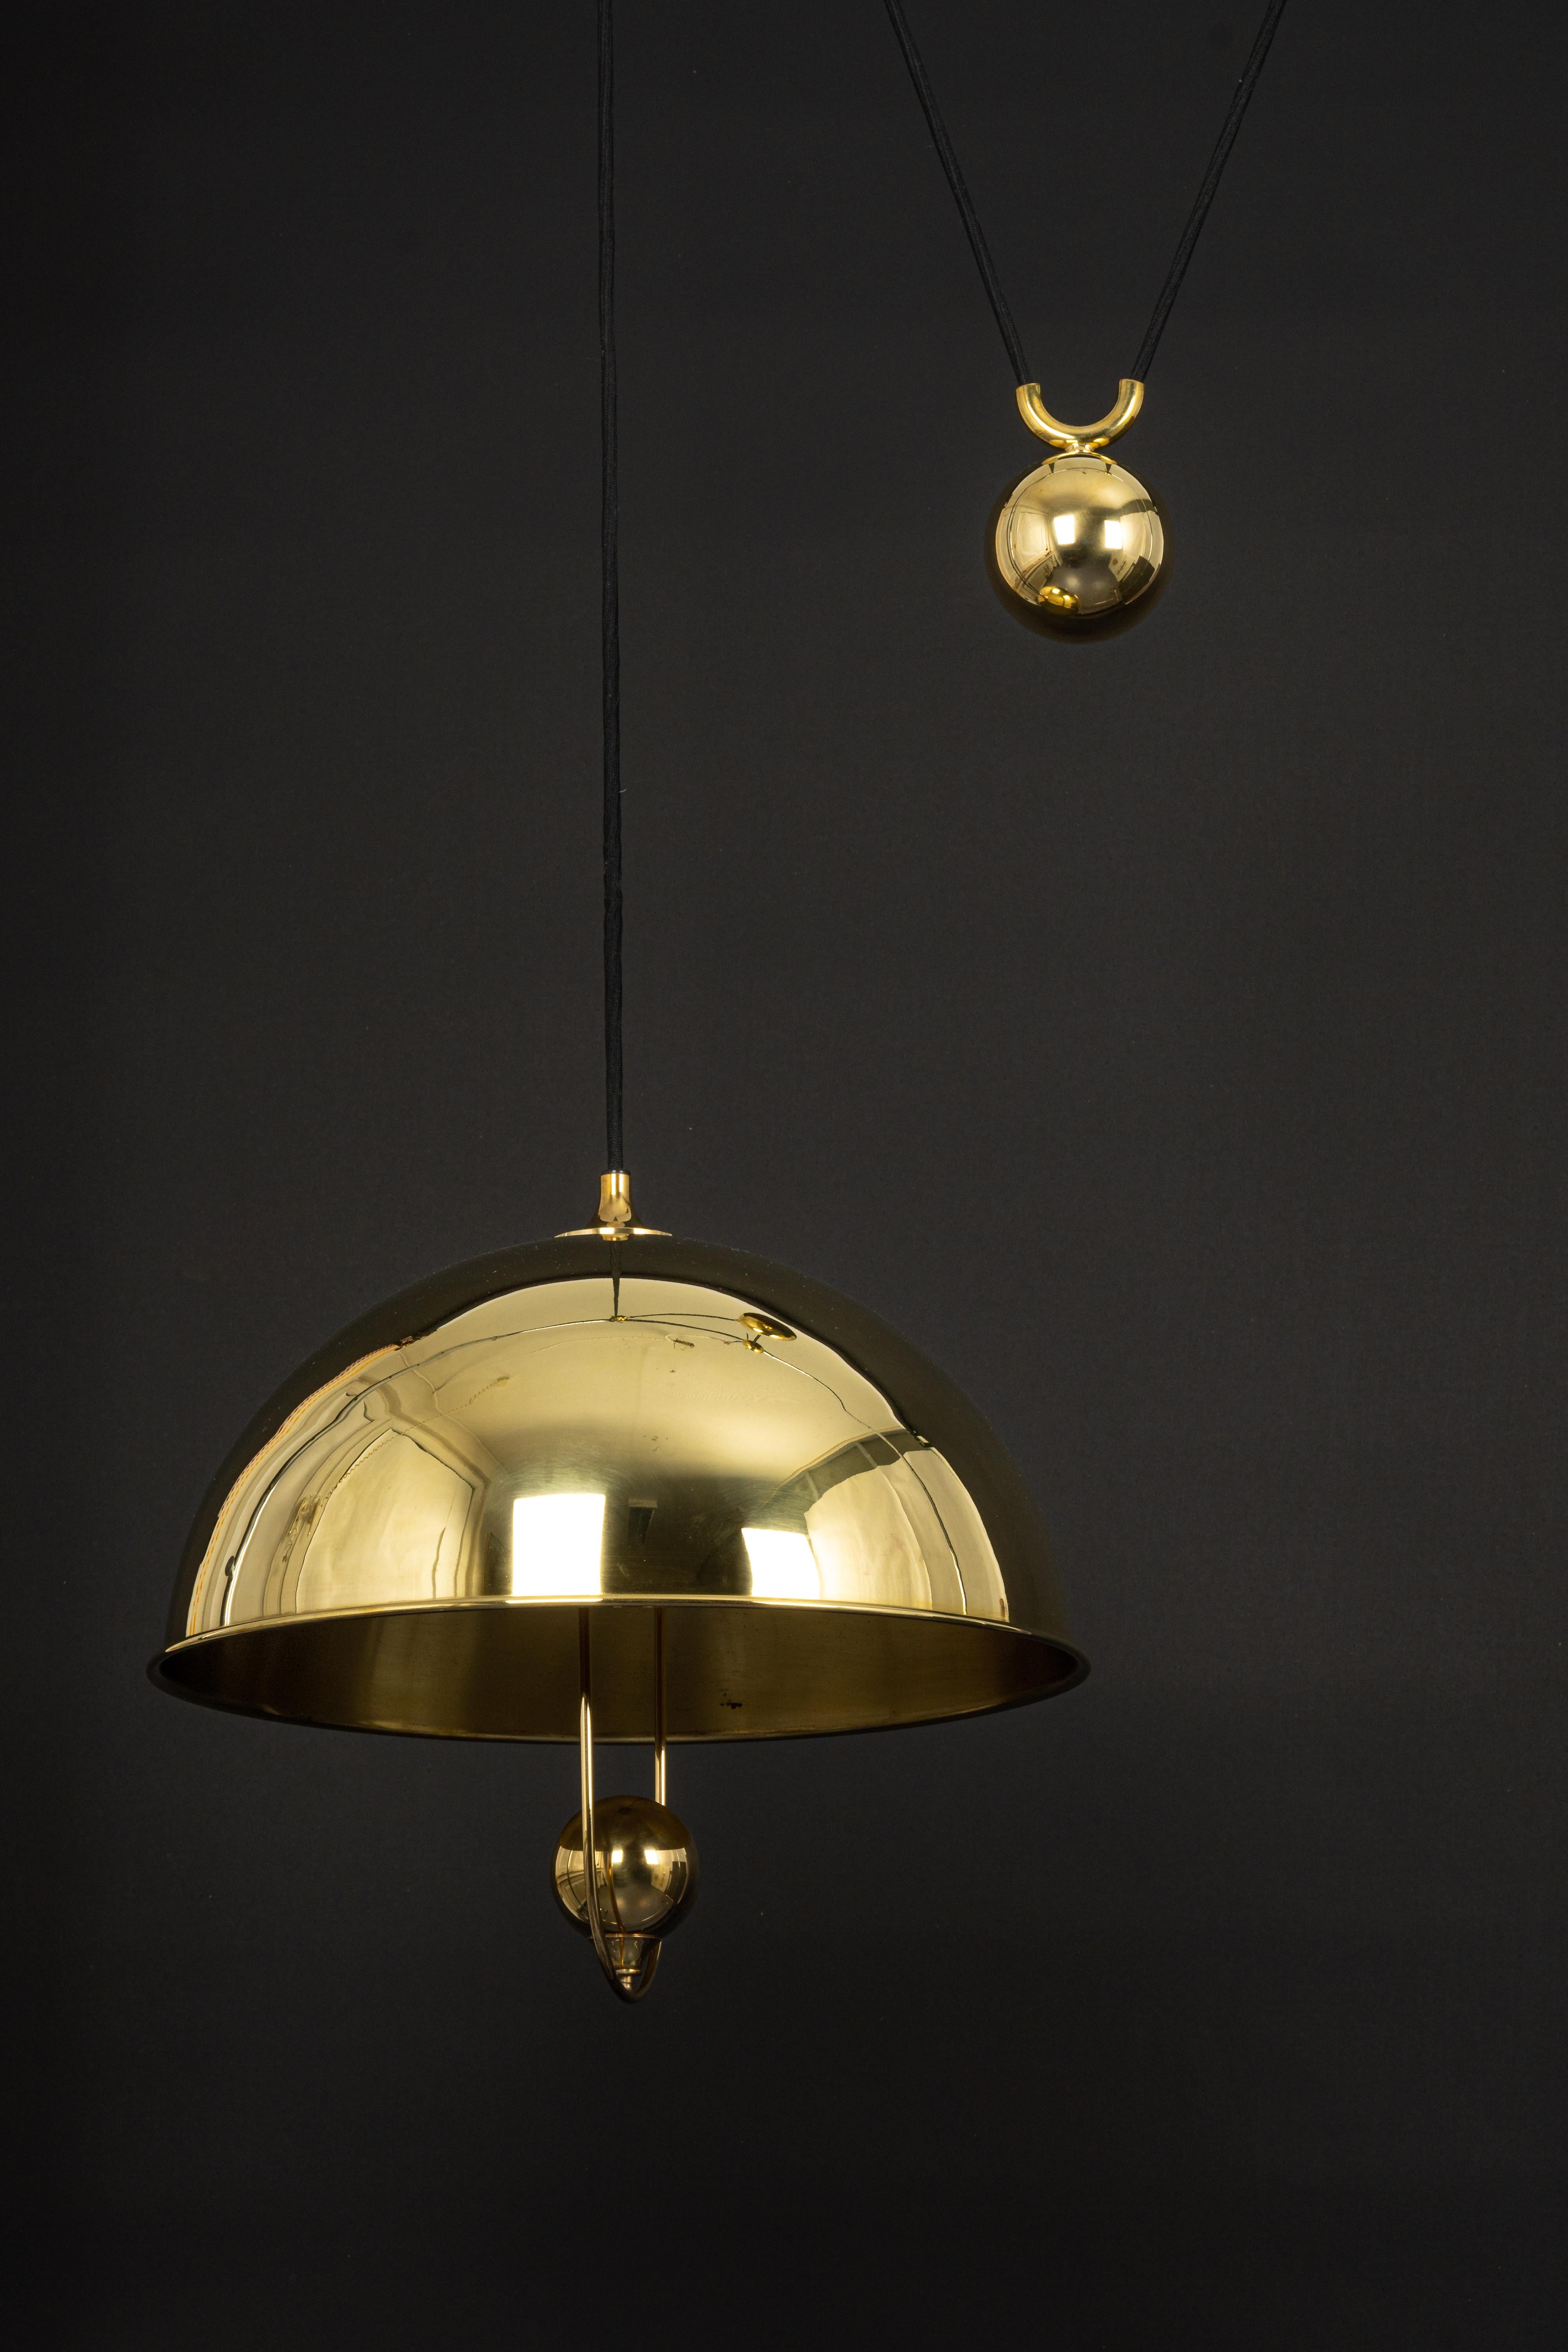 Stunning brass pendant with adjustable counterweight designed by Florian Schulz, Germany, 1970s

One heavy metal ball counterweight and one brass dome. Cloth cord.
Good vintage condition, with small signs of age and use. Height is